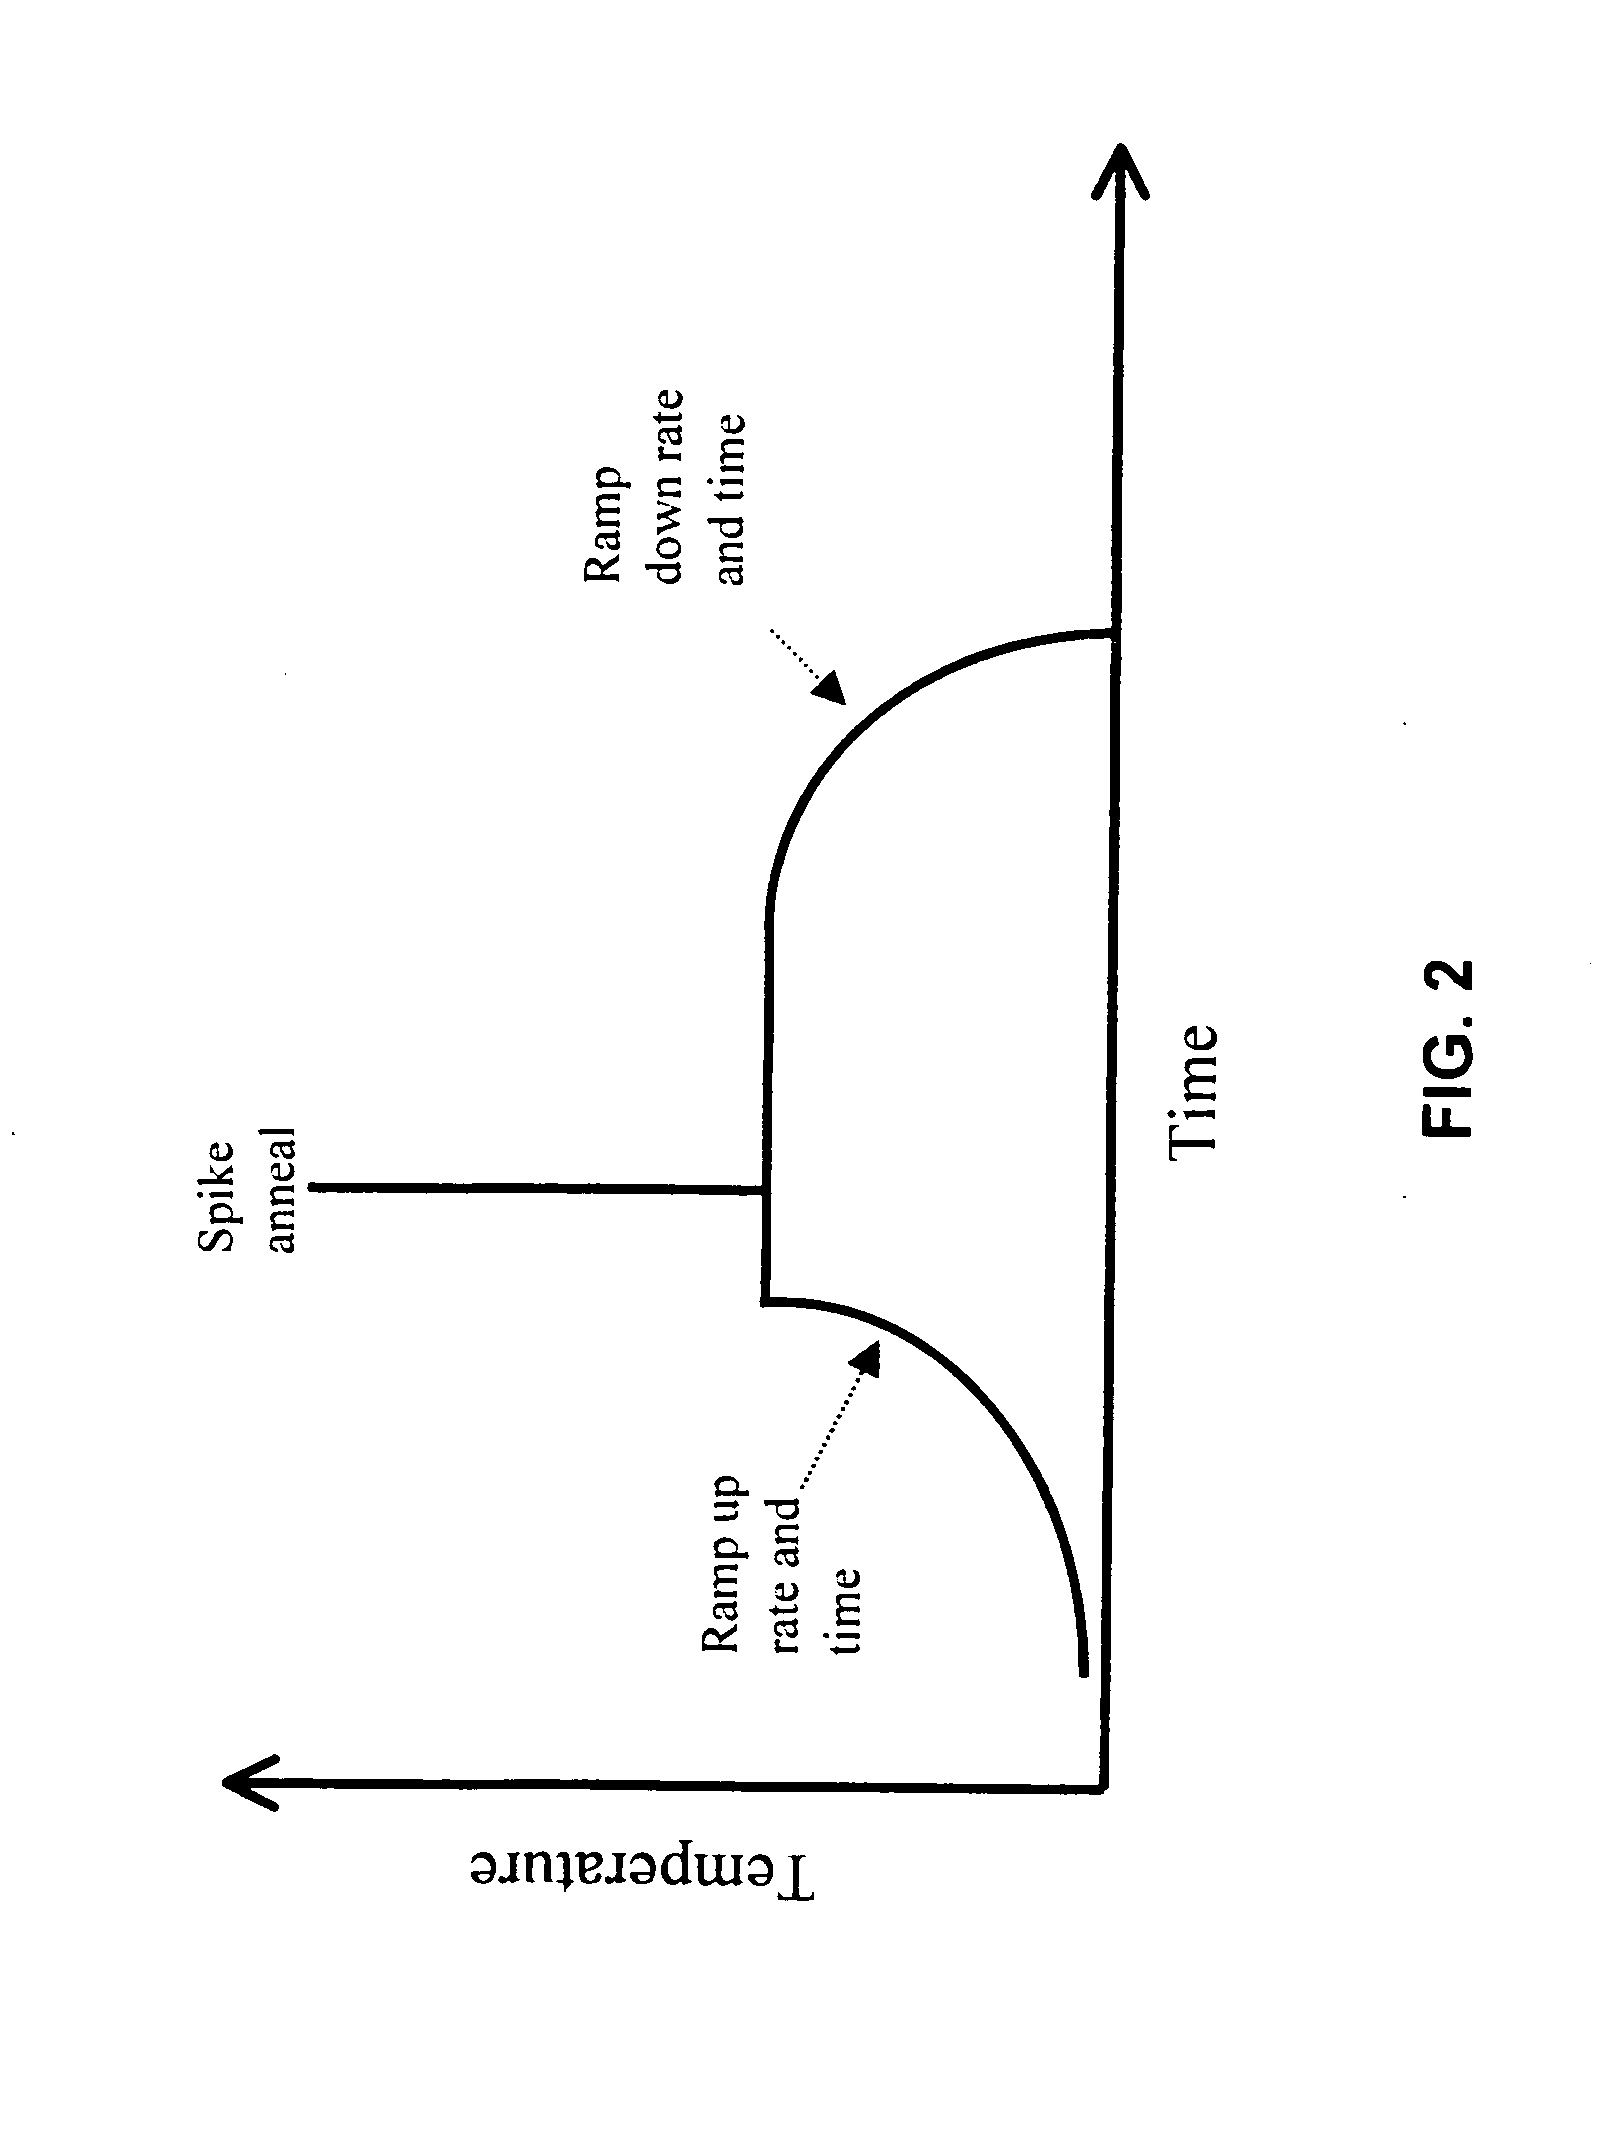 Thermal processing of substrates with pre- and post-spike temperature control